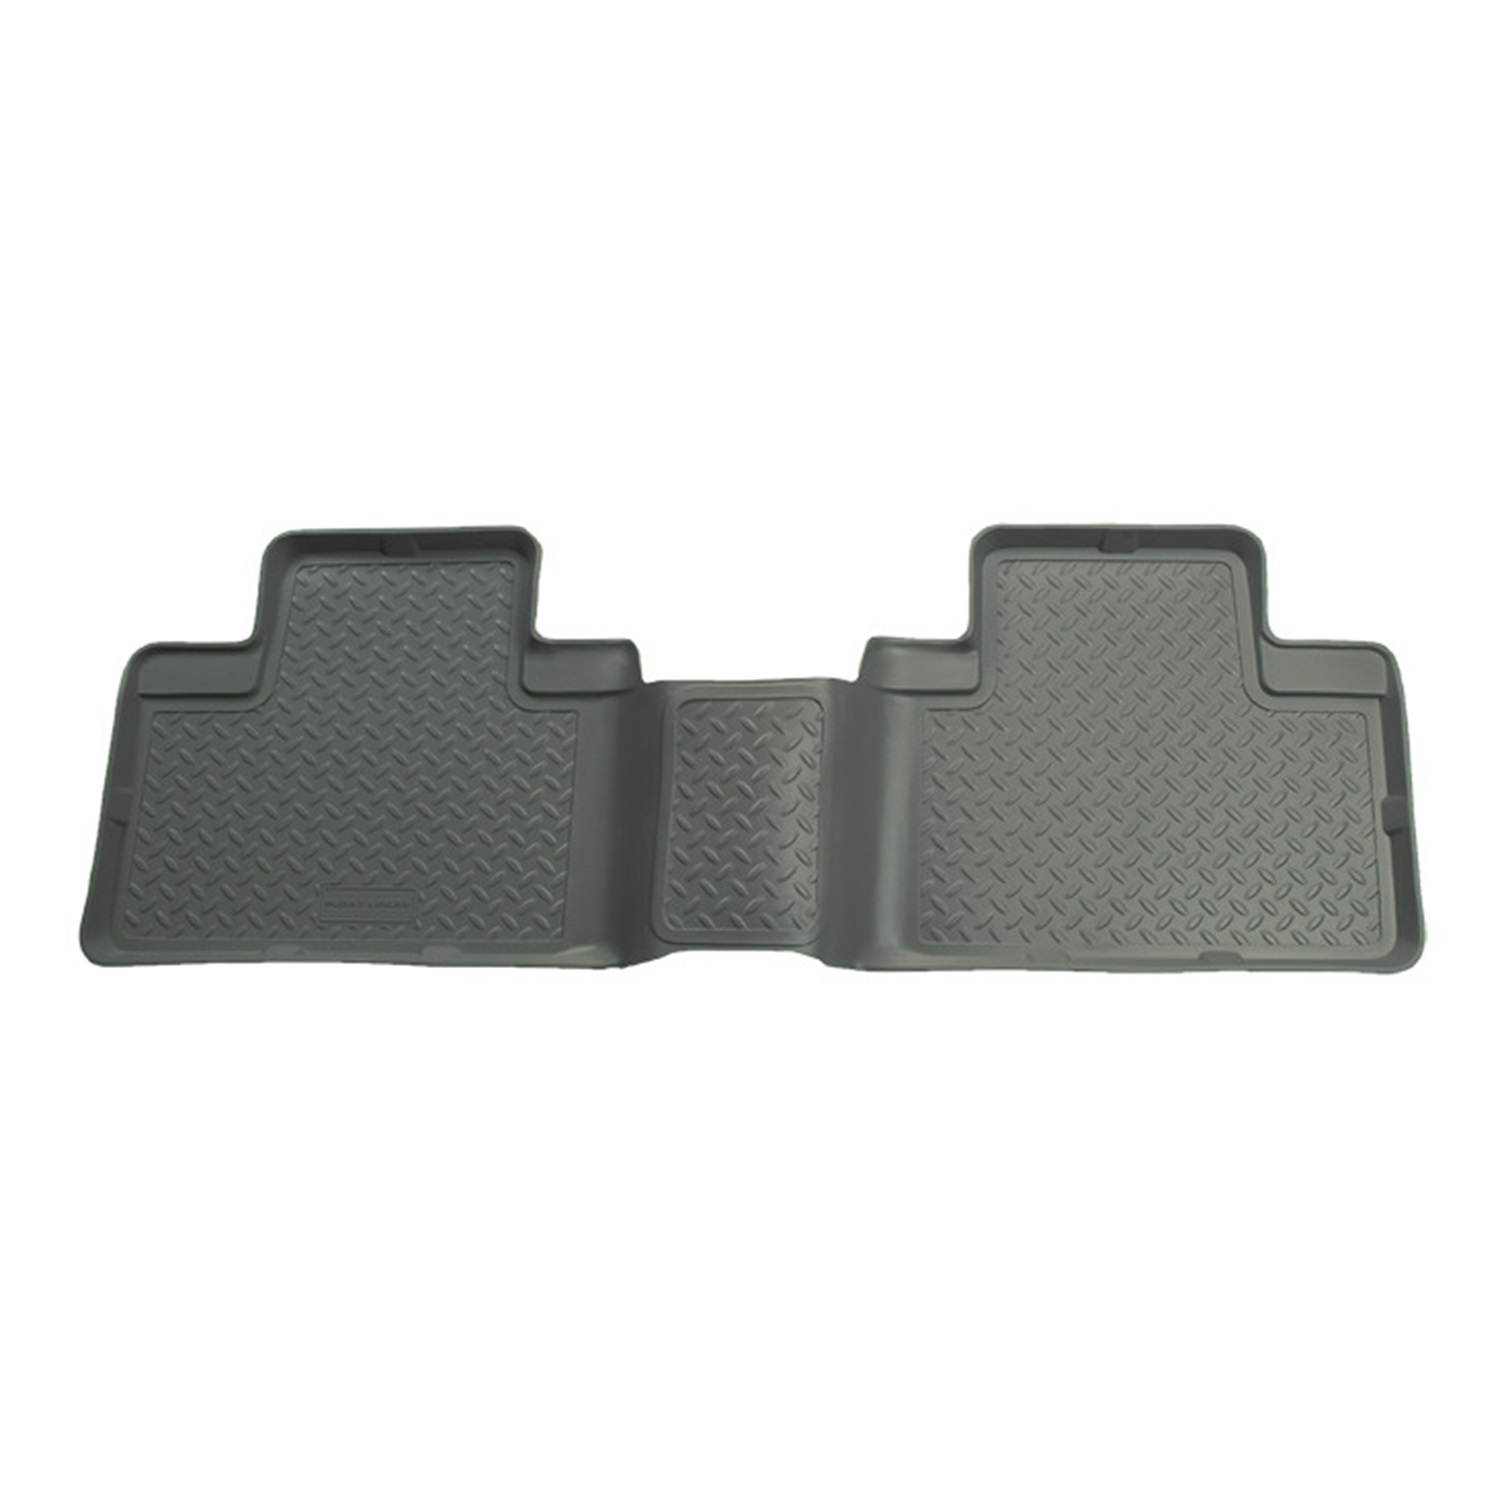 Husky Liners Husky Liners 60202 Classic Style; Floor Liner Fits 02-07 Liberty